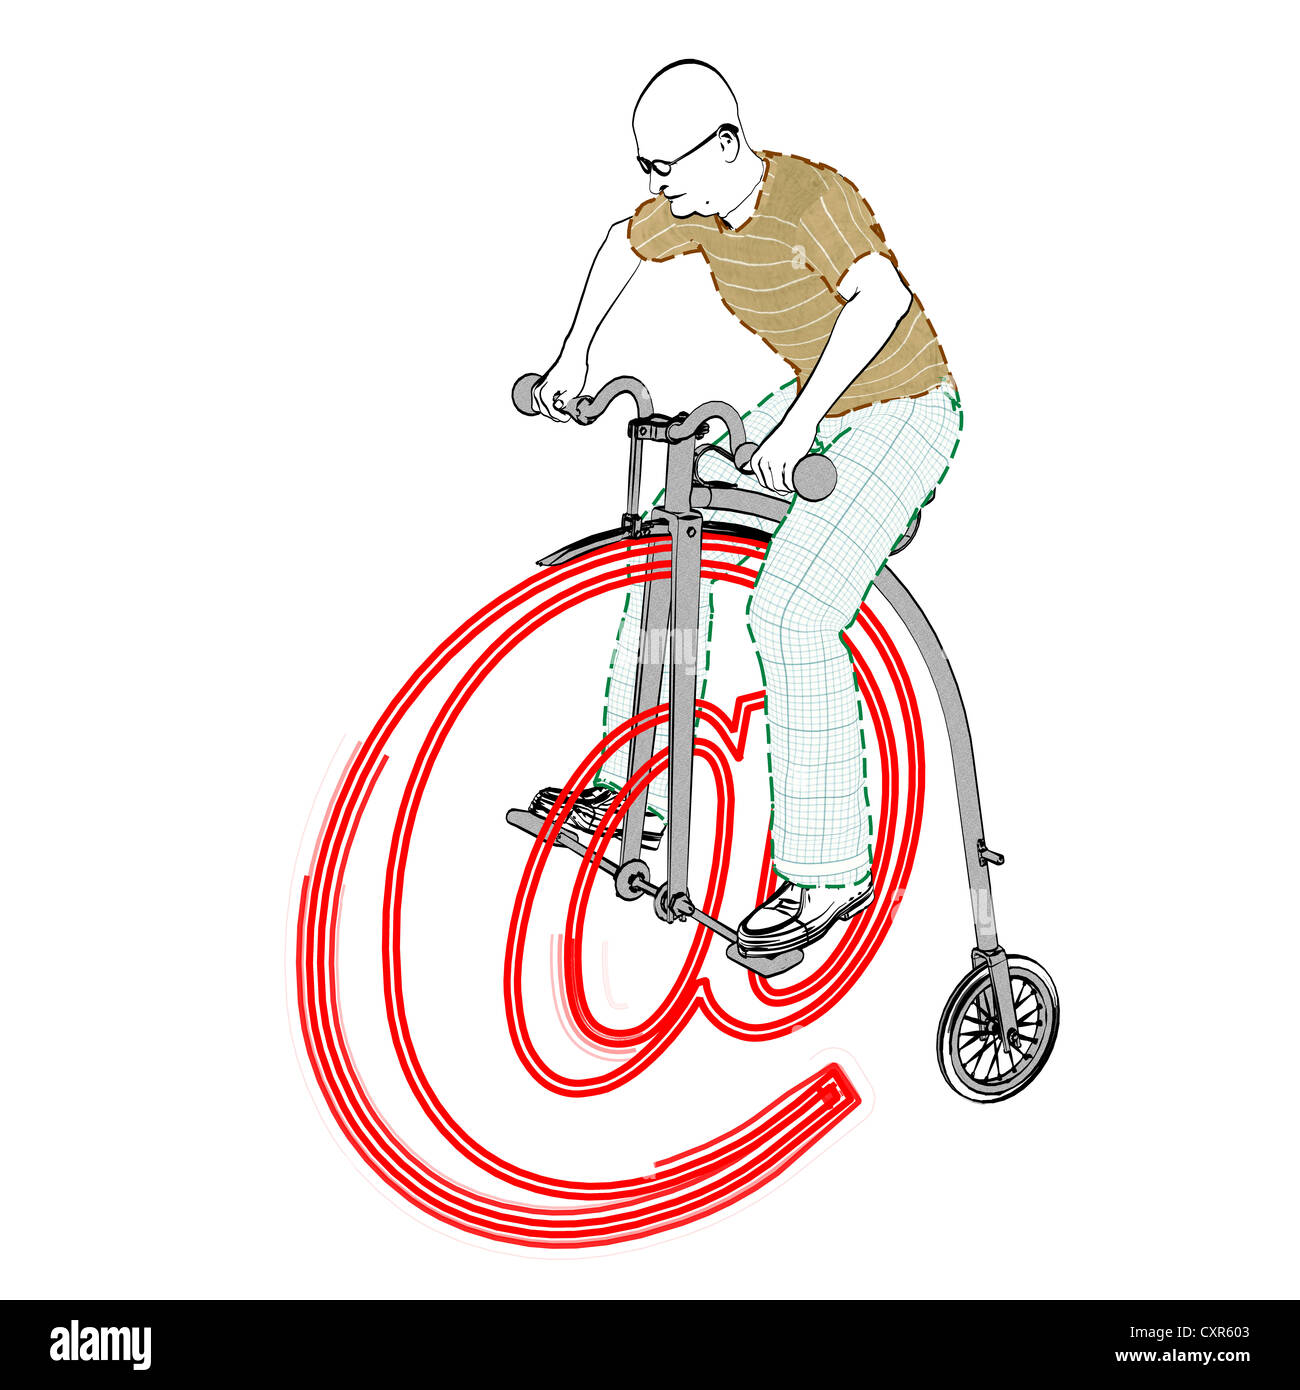 Old man riding a penny farthing bicycle consisting of an at sign, senior surfing the web, illustration Stock Photo